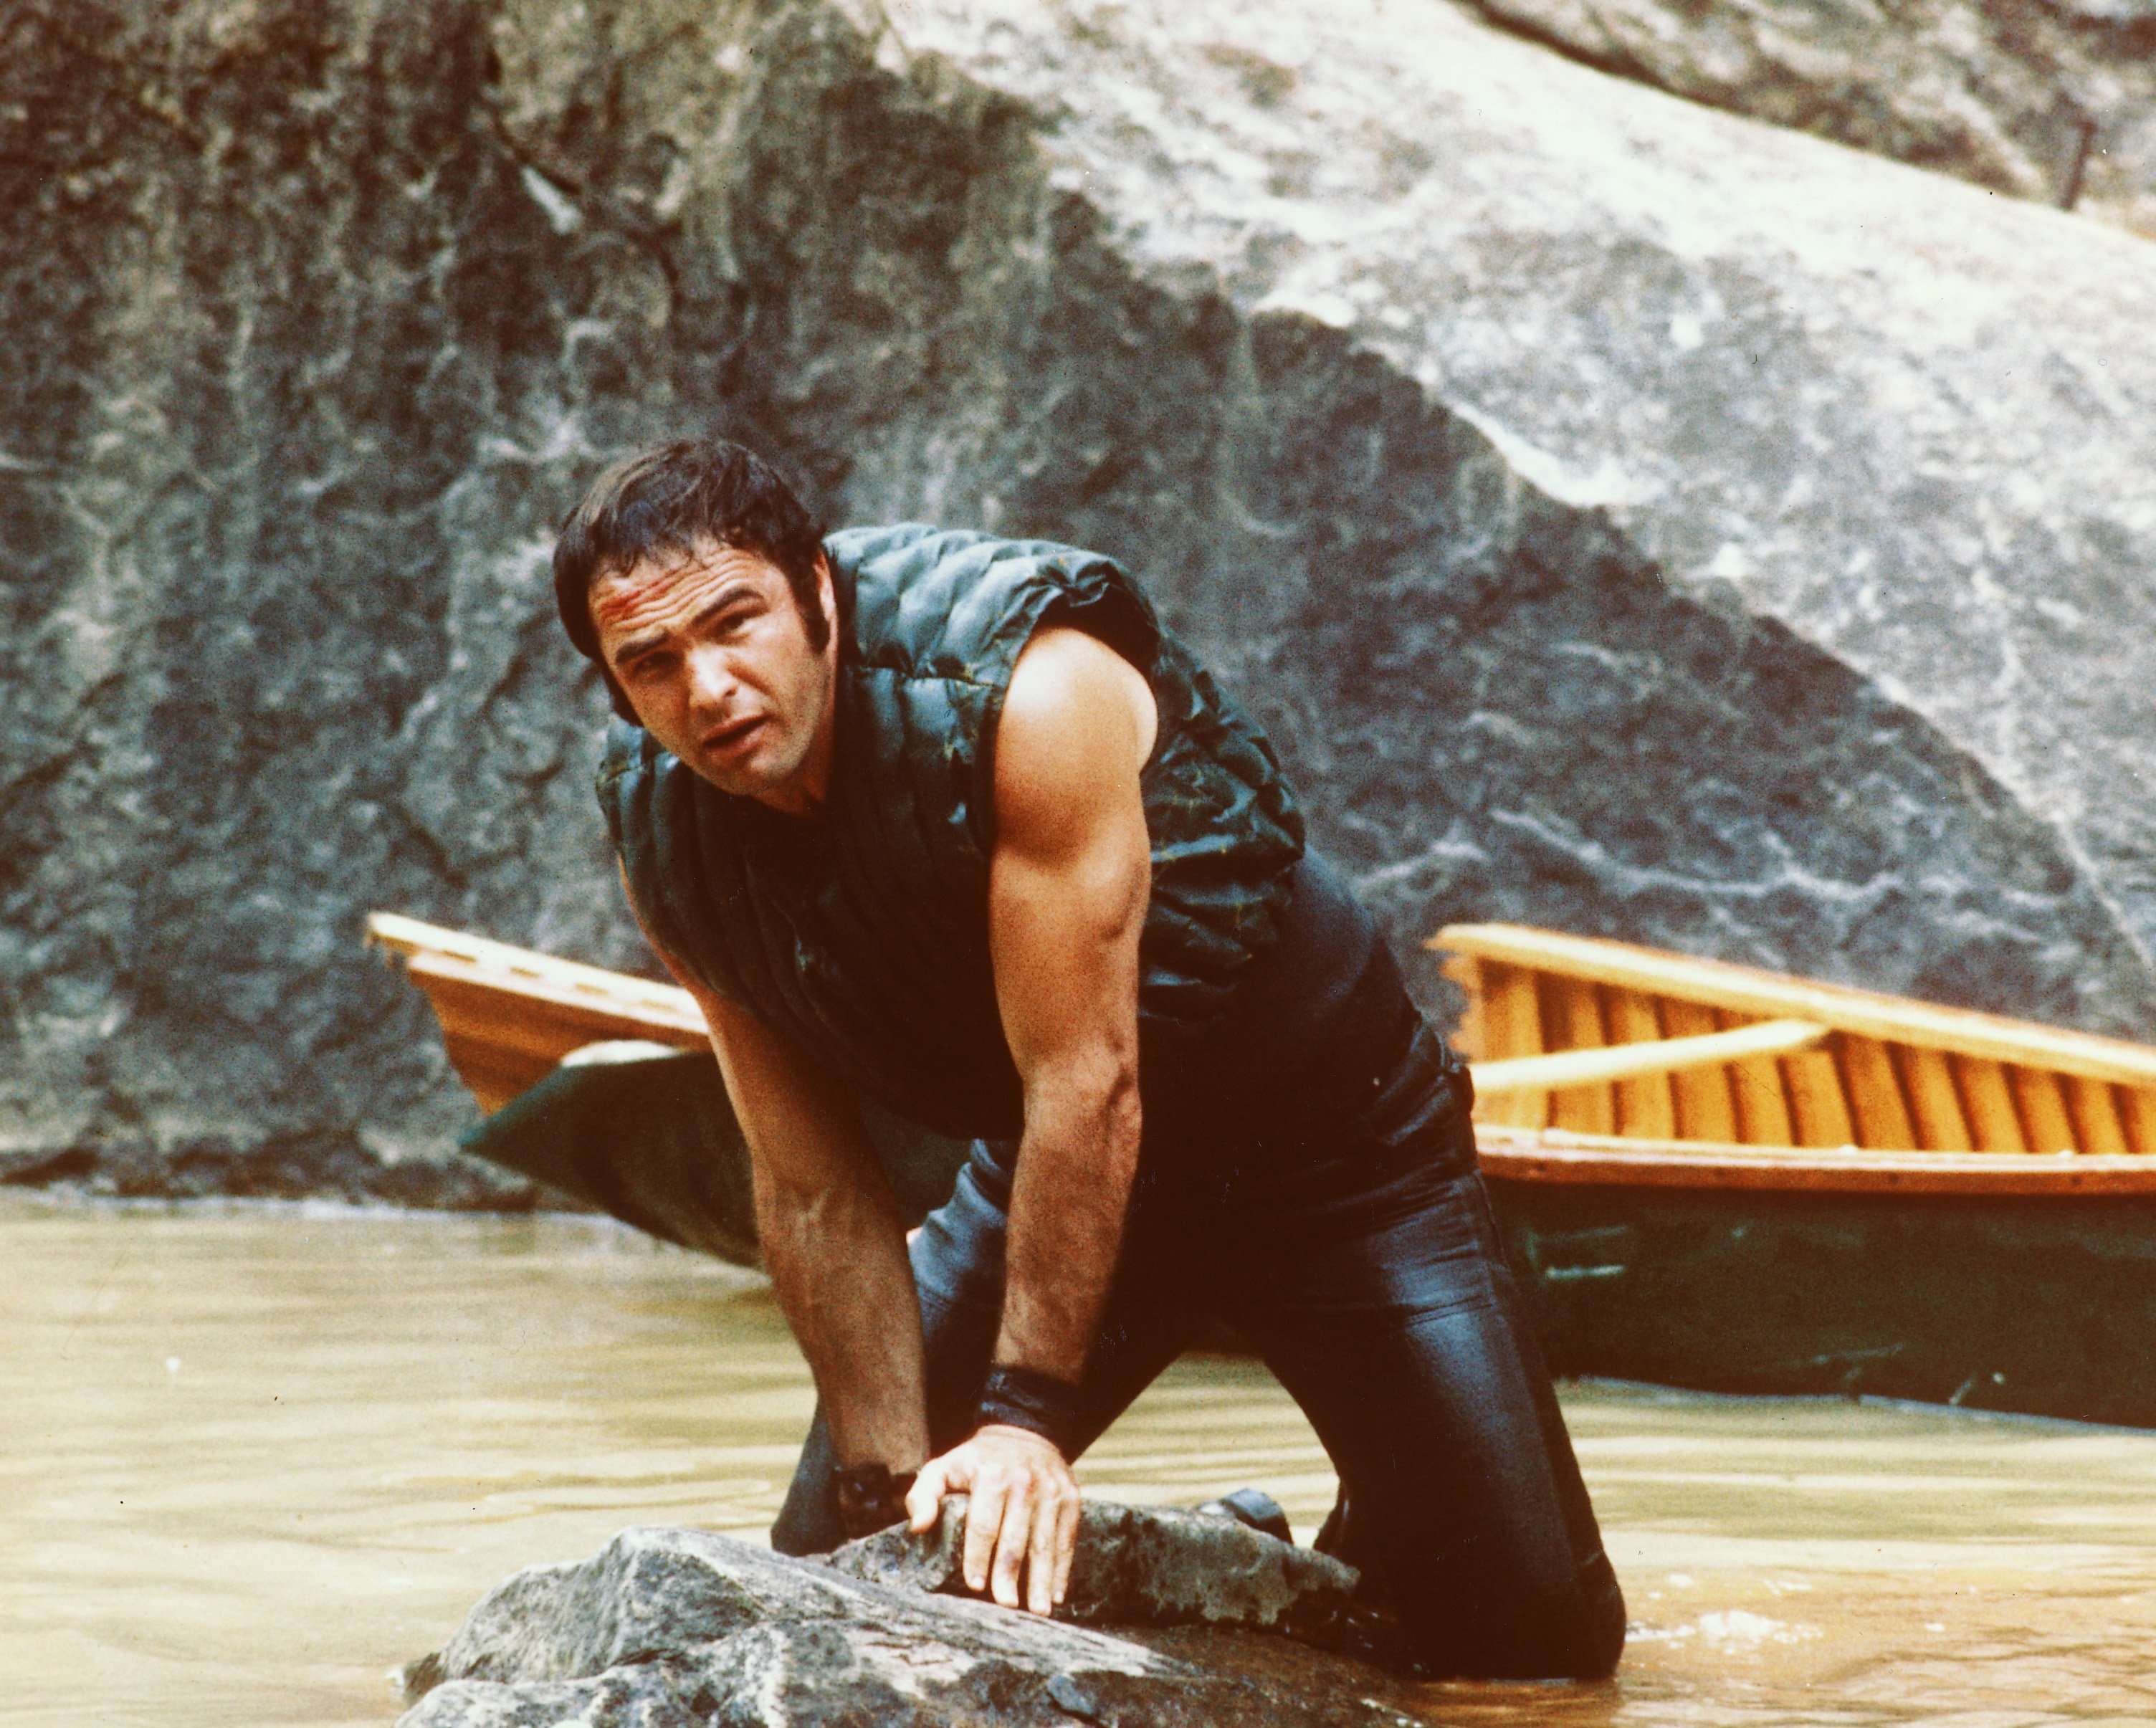 , holding onto some rocks as he struggles in the water with his boat behind him in a publicity still issued for the film, "Deliverance," in 1972. | Source: Getty Images